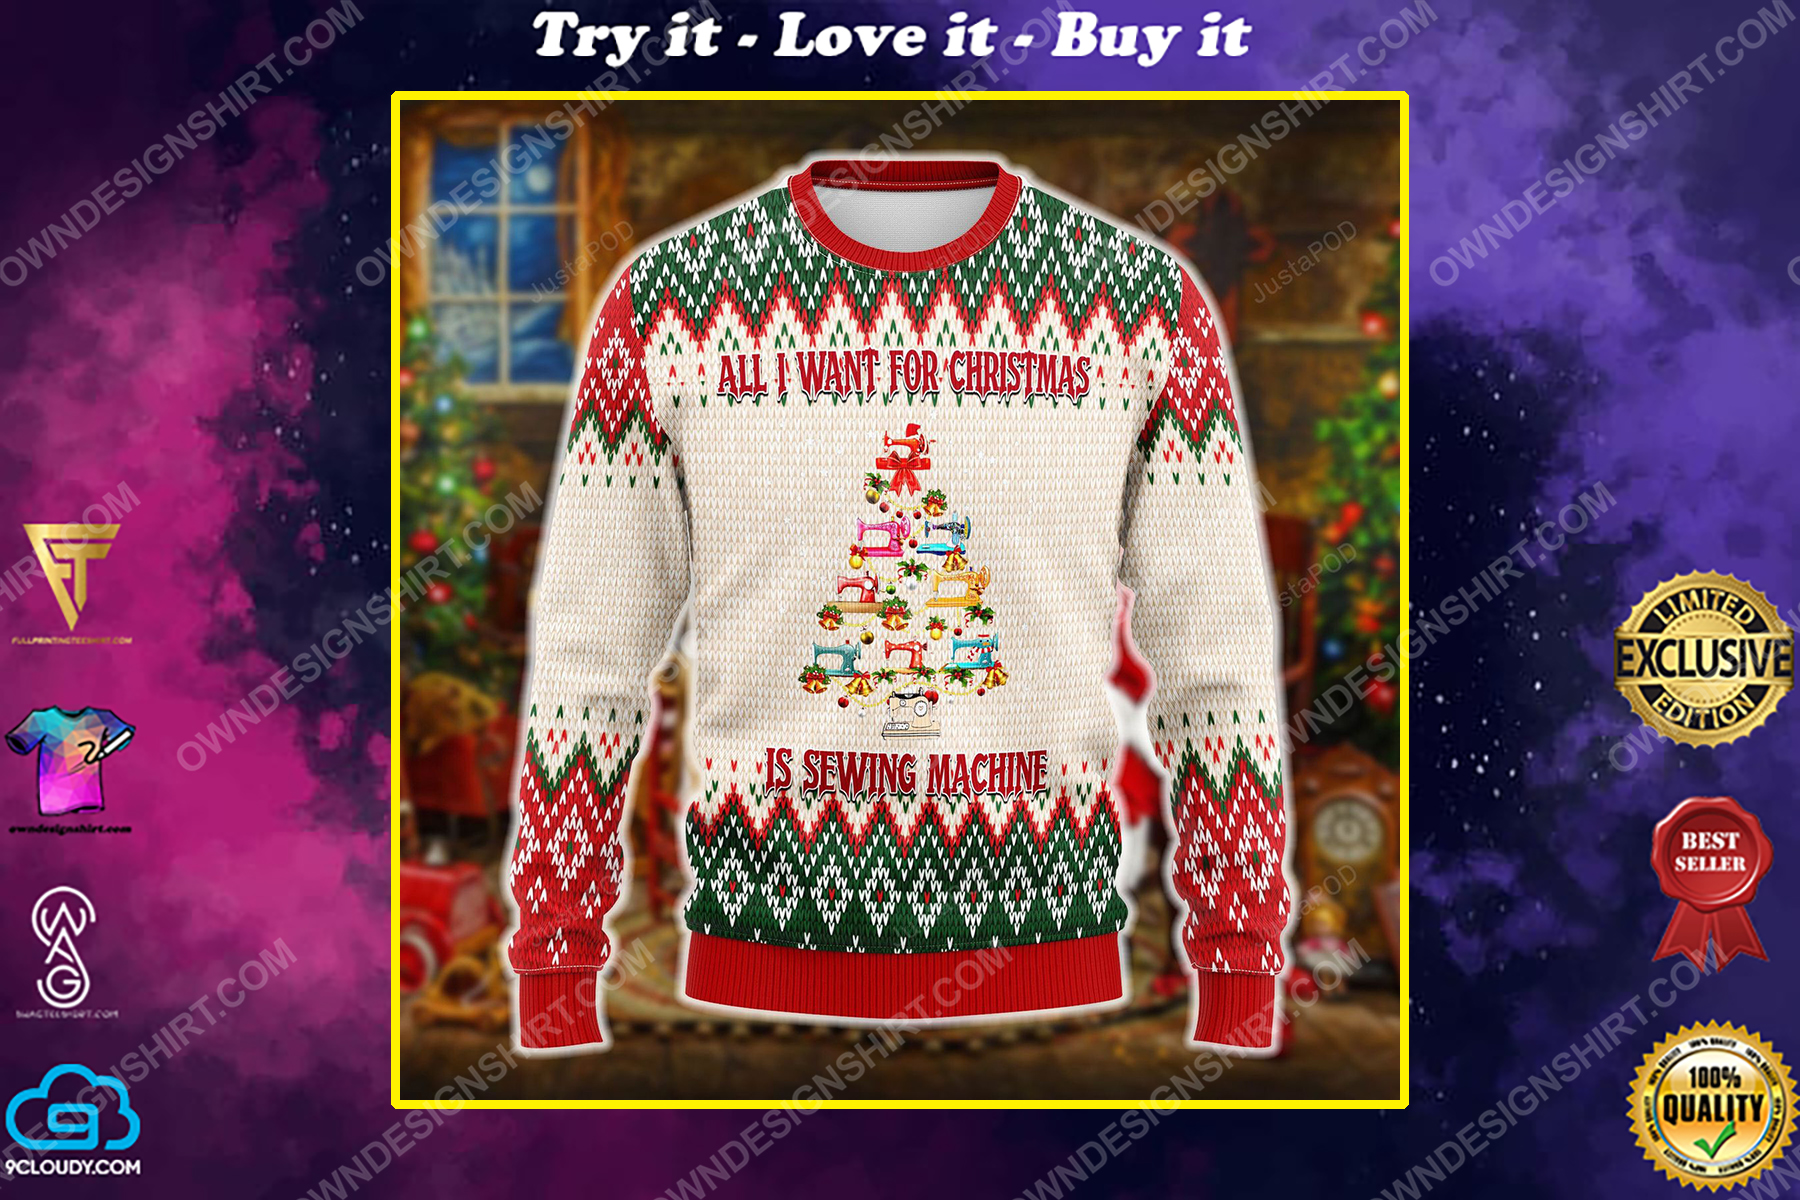 All i want for christmas is sewing machine ugly christmas sweater